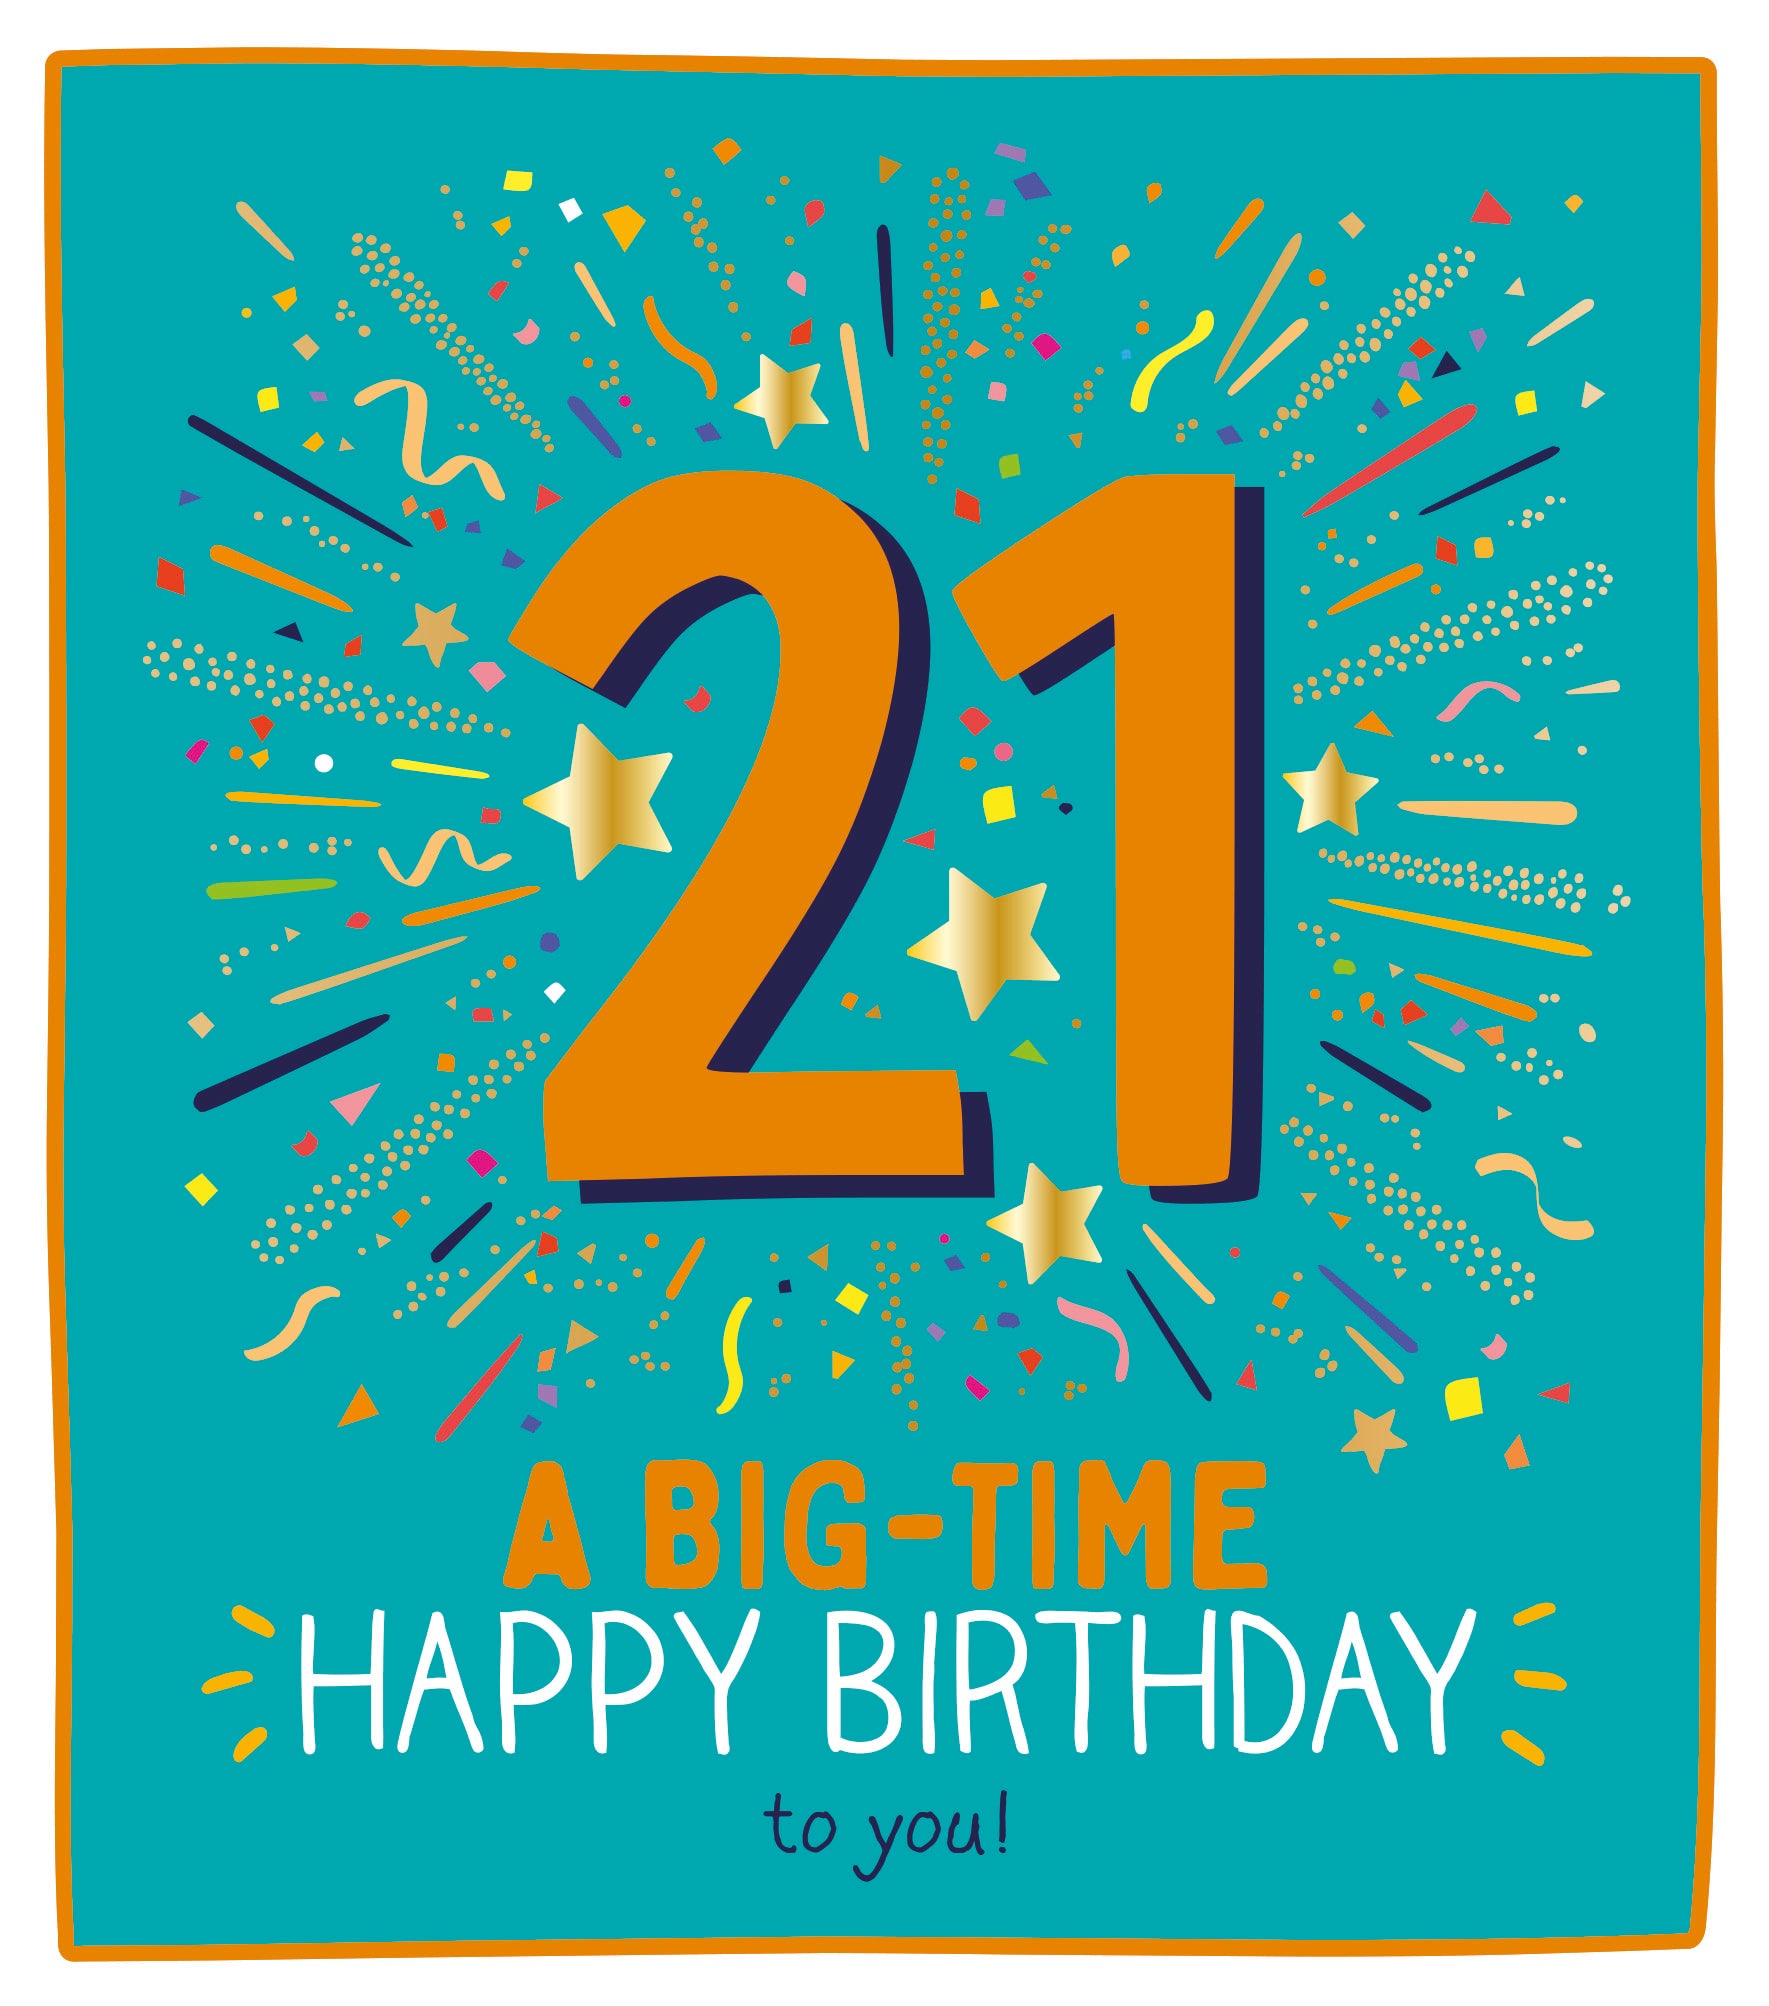 21 Big-Time Happy Birthday Card from Penny Black